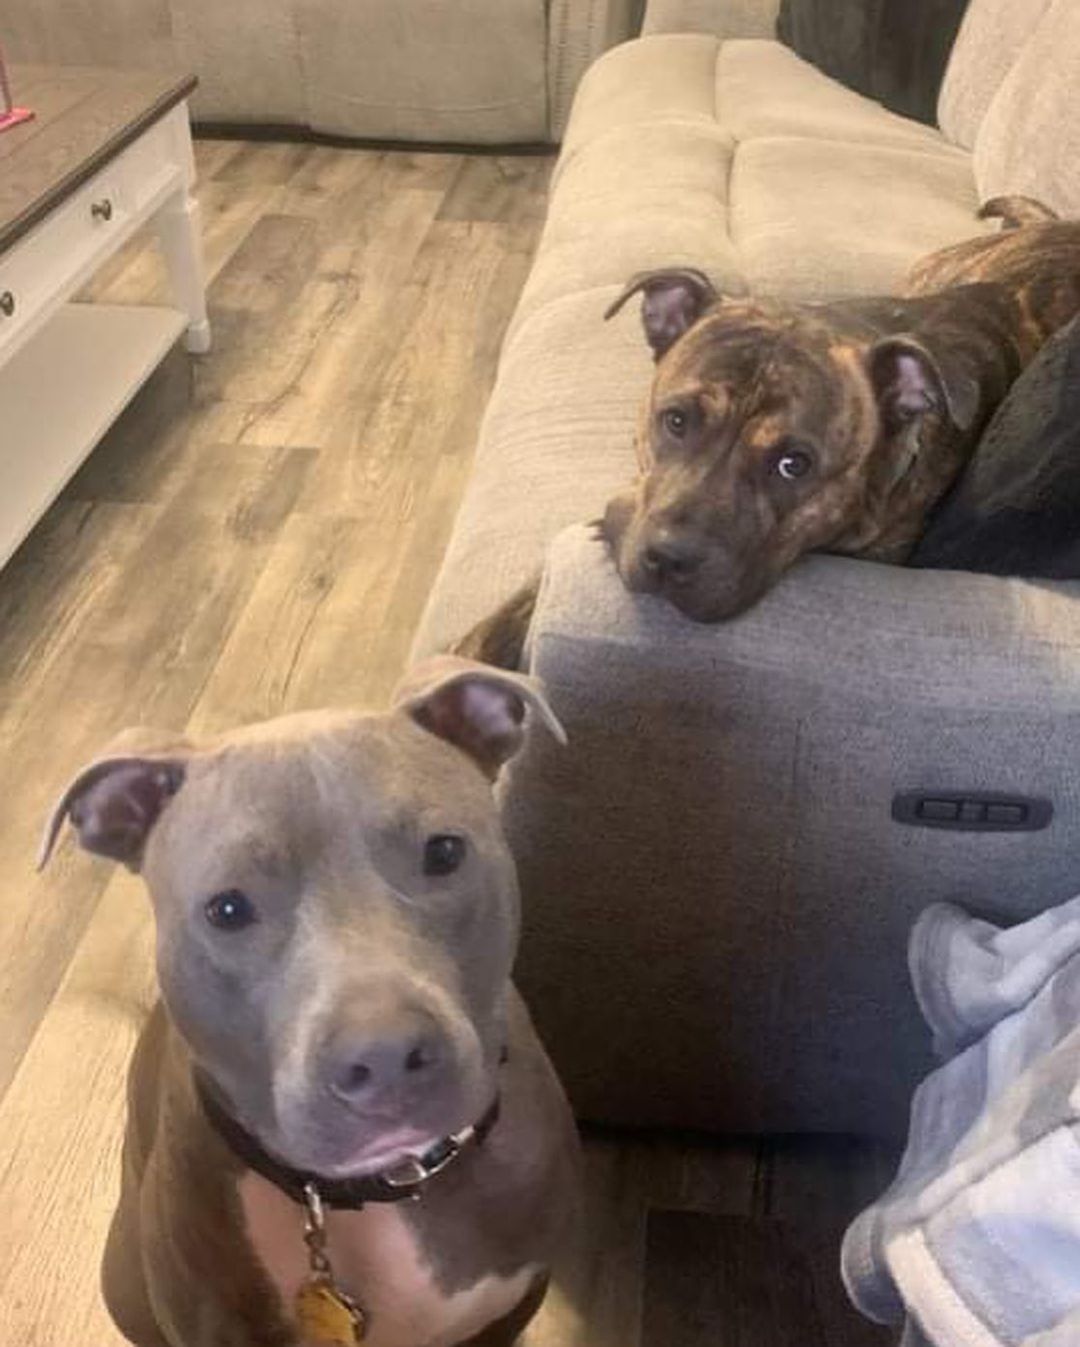 We are on a roll here, folks!! DORA IS ADOPTED!!! 🥰🥰🥰

Dora and her new big brother are absolutely obsessed with each other and they couldn’t be a better fit. The first night she was there, he actually slept outside her crate to make sure she was ok 🥺🥲🥲🥲

Dora will get to spend her life having fun and playing, running, and snuggling with her new family!

Thank you to everyone who shared and to her new parents for being the BEST!! 

Happy tails, Dora!! 💙🐾

<a target='_blank' href='https://www.instagram.com/explore/tags/paunderdogmutts/'>#paunderdogmutts</a>